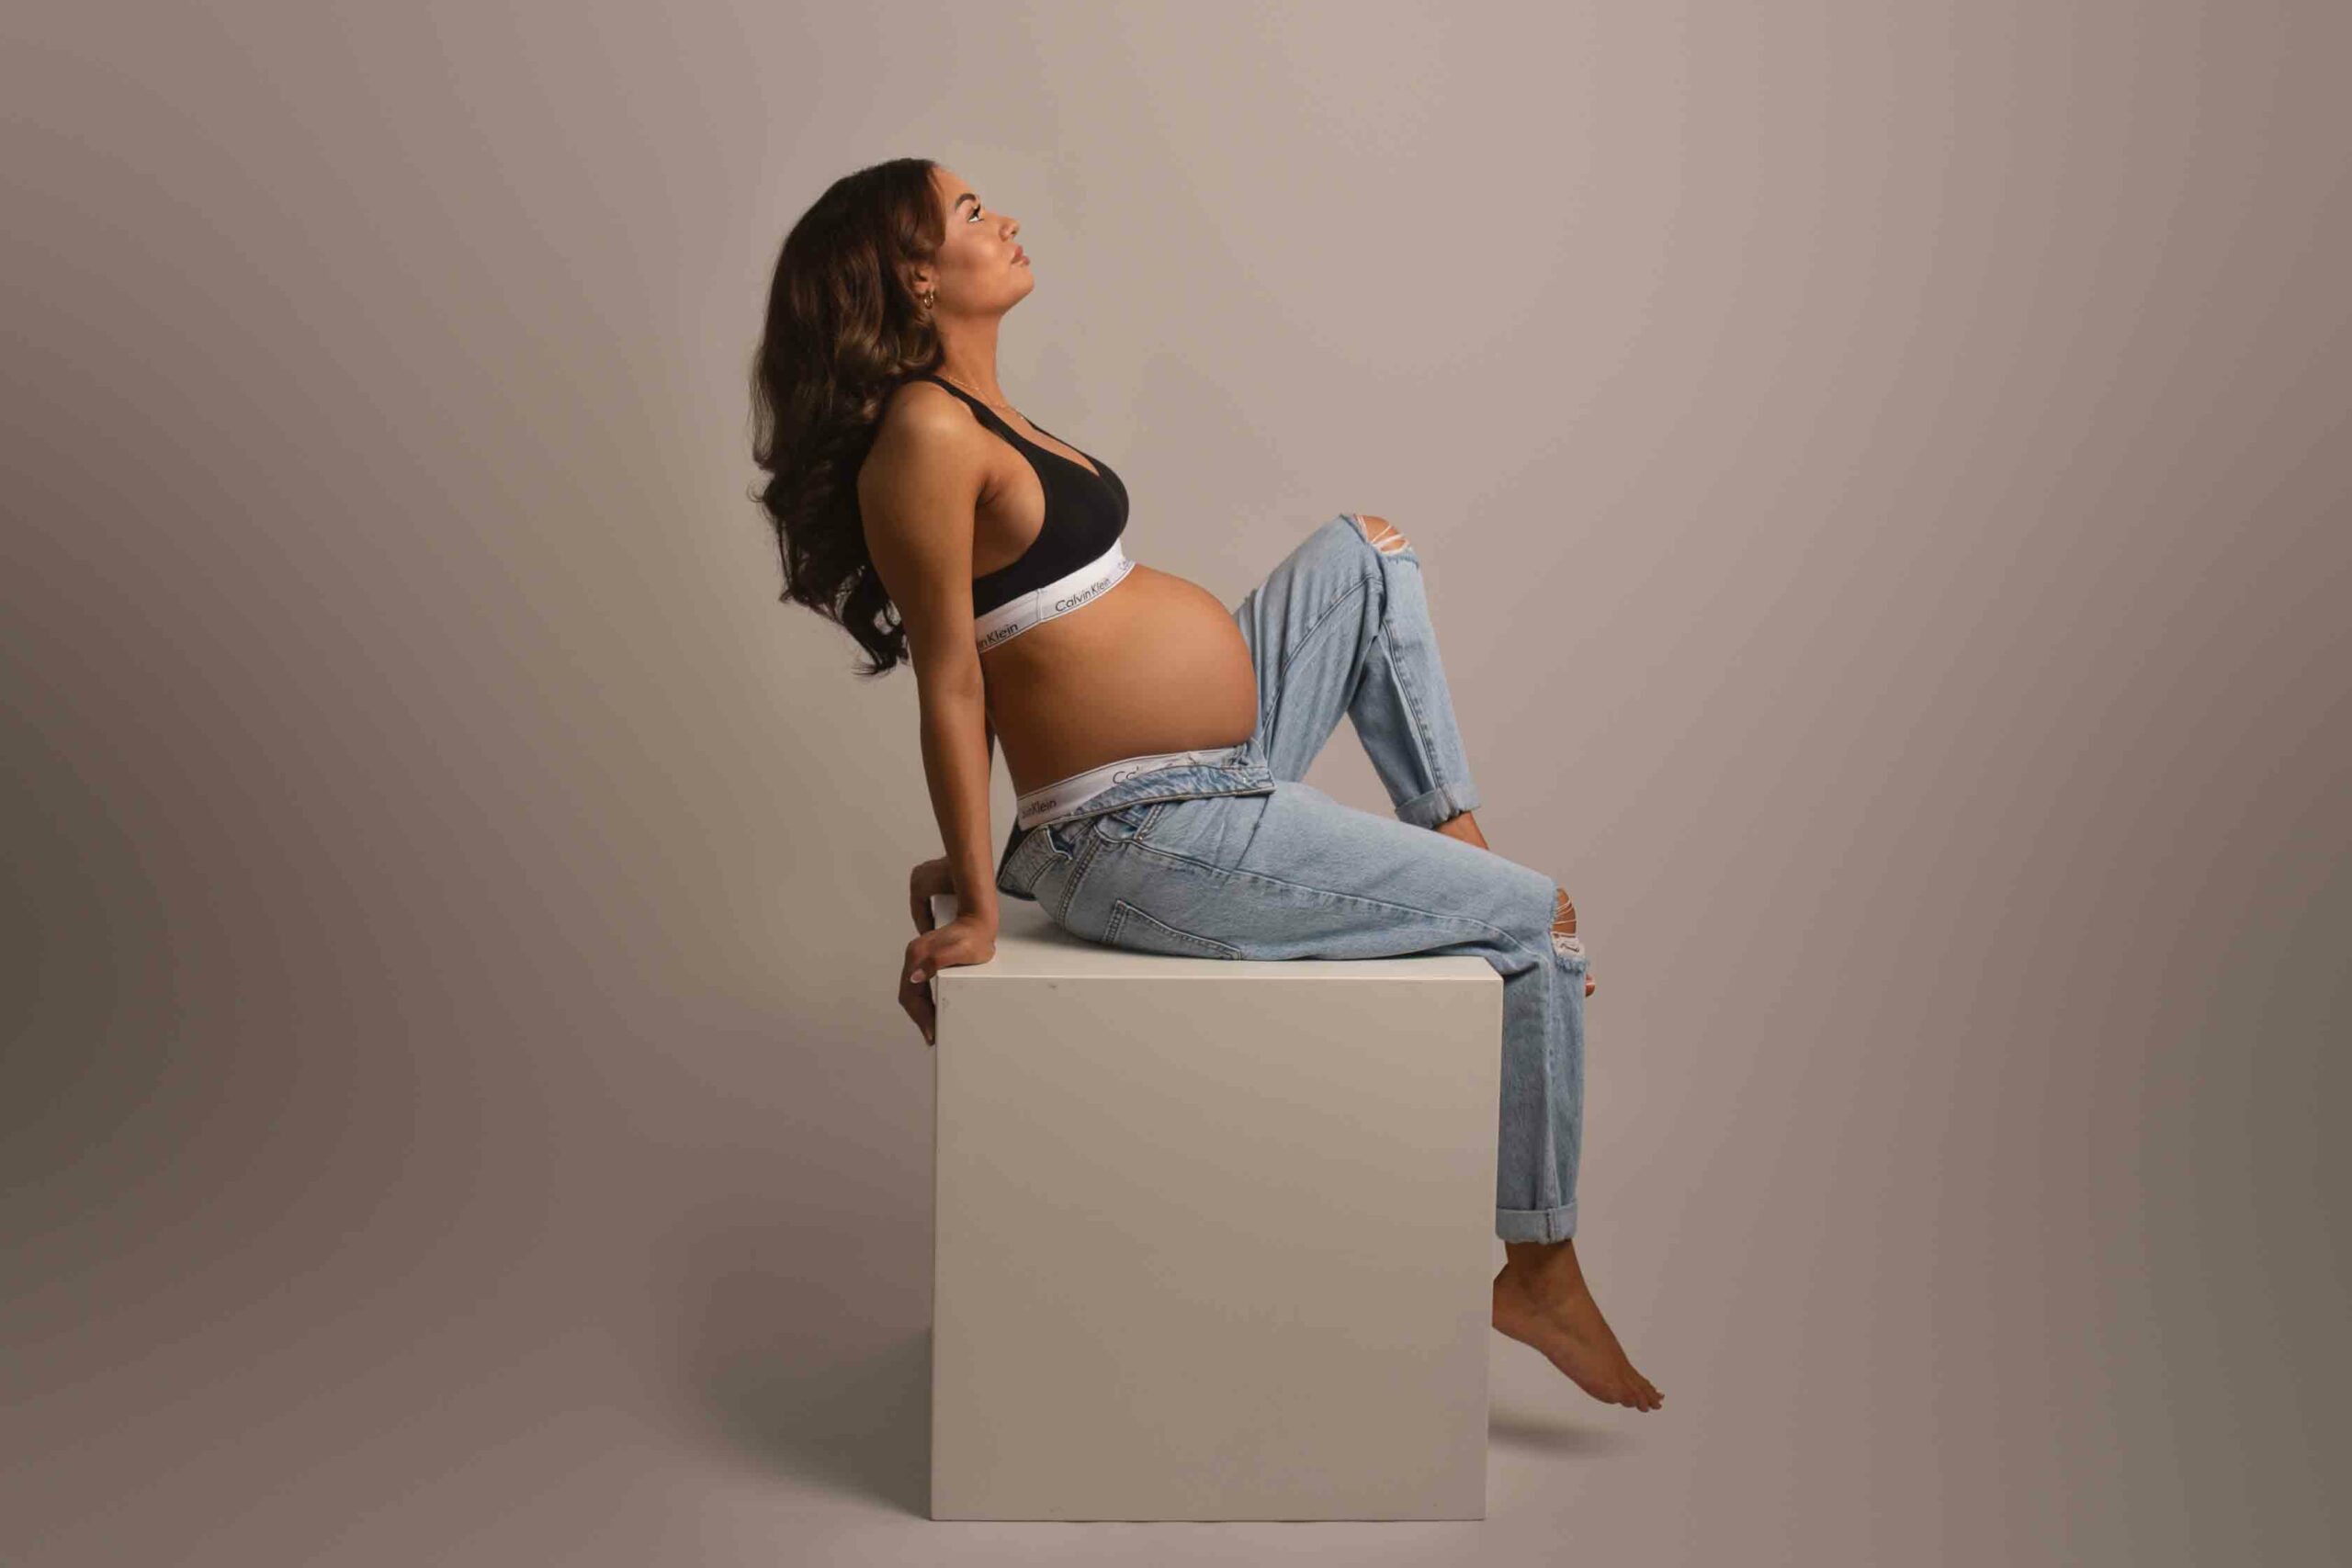 Pregnant mum photographed in jeans and black sports bra. Sitting on white block with one knee up. Photographed in my studio in Strood, Kent